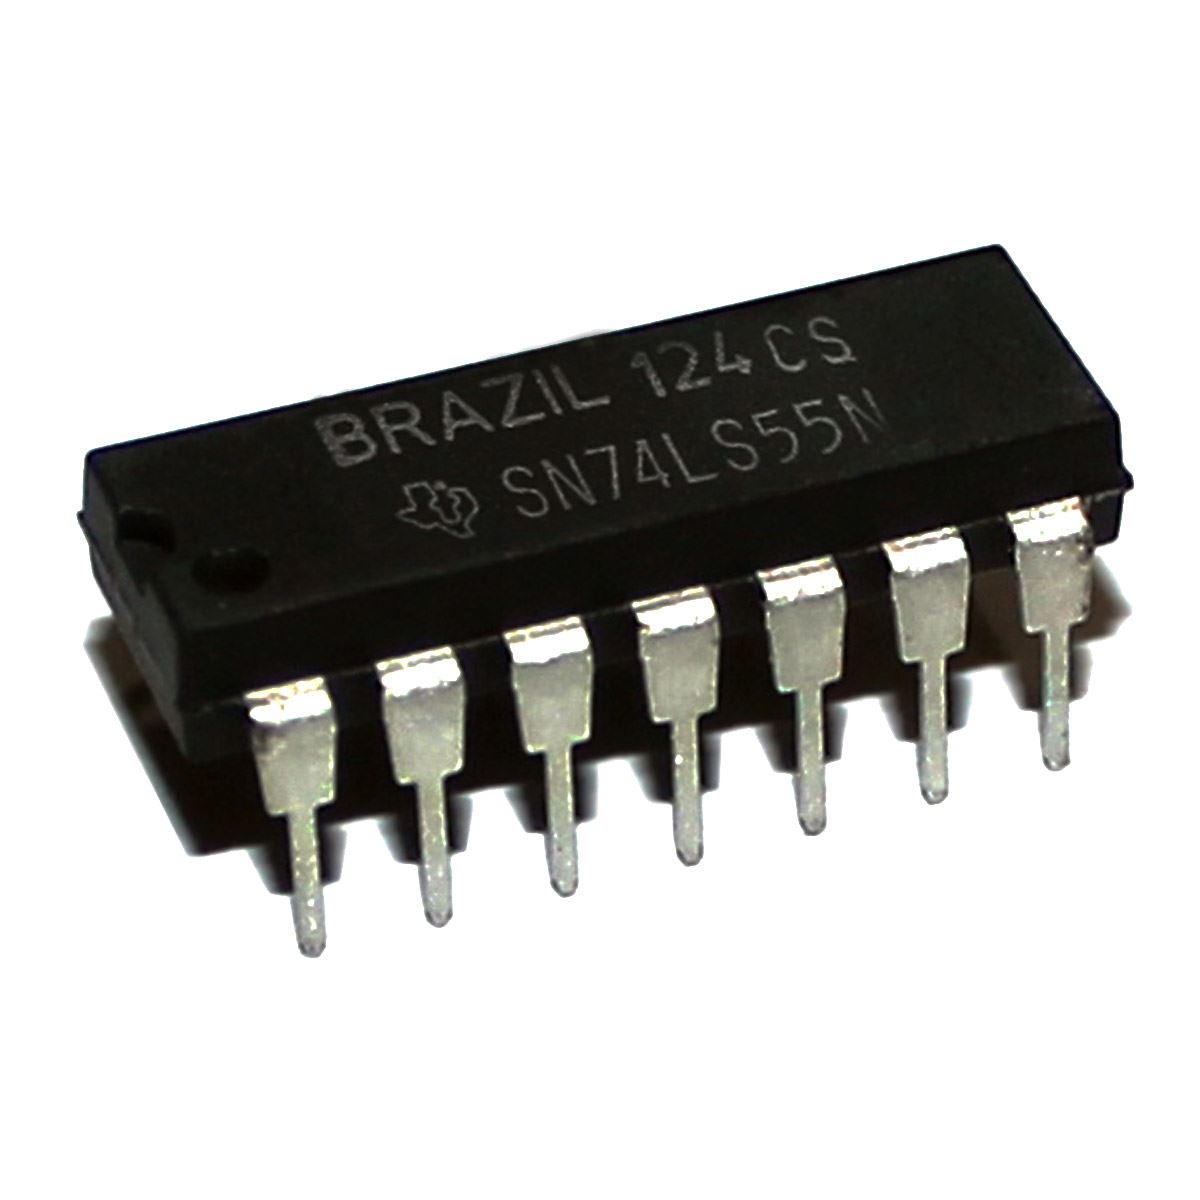 74LS55: 14P 2 Wide-4 input AND/OR/Invert Gate